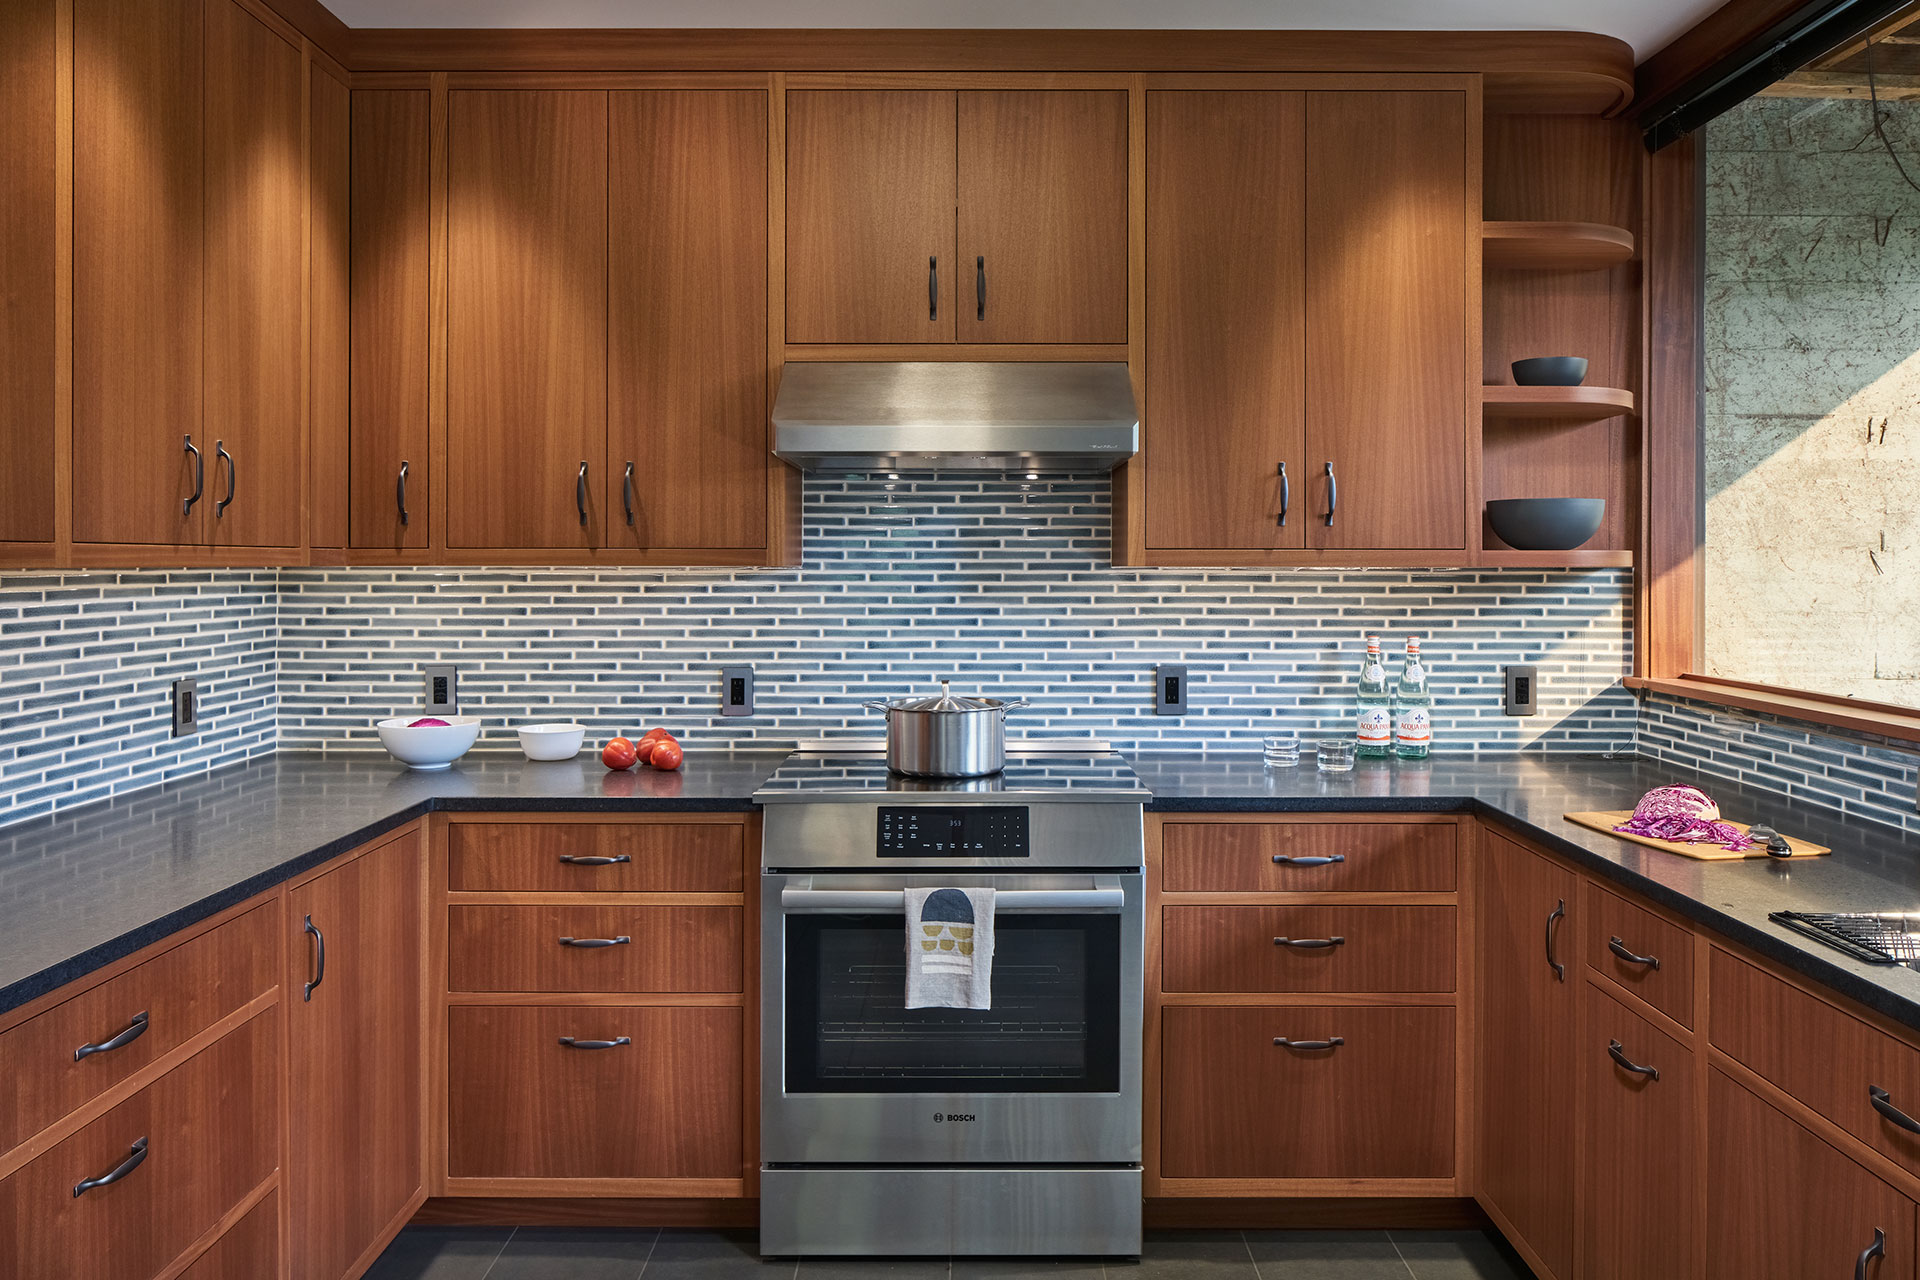 A new electric induction range and stainless steel hood are the focal points of the renovated kitchen in the Sylvan Basement.